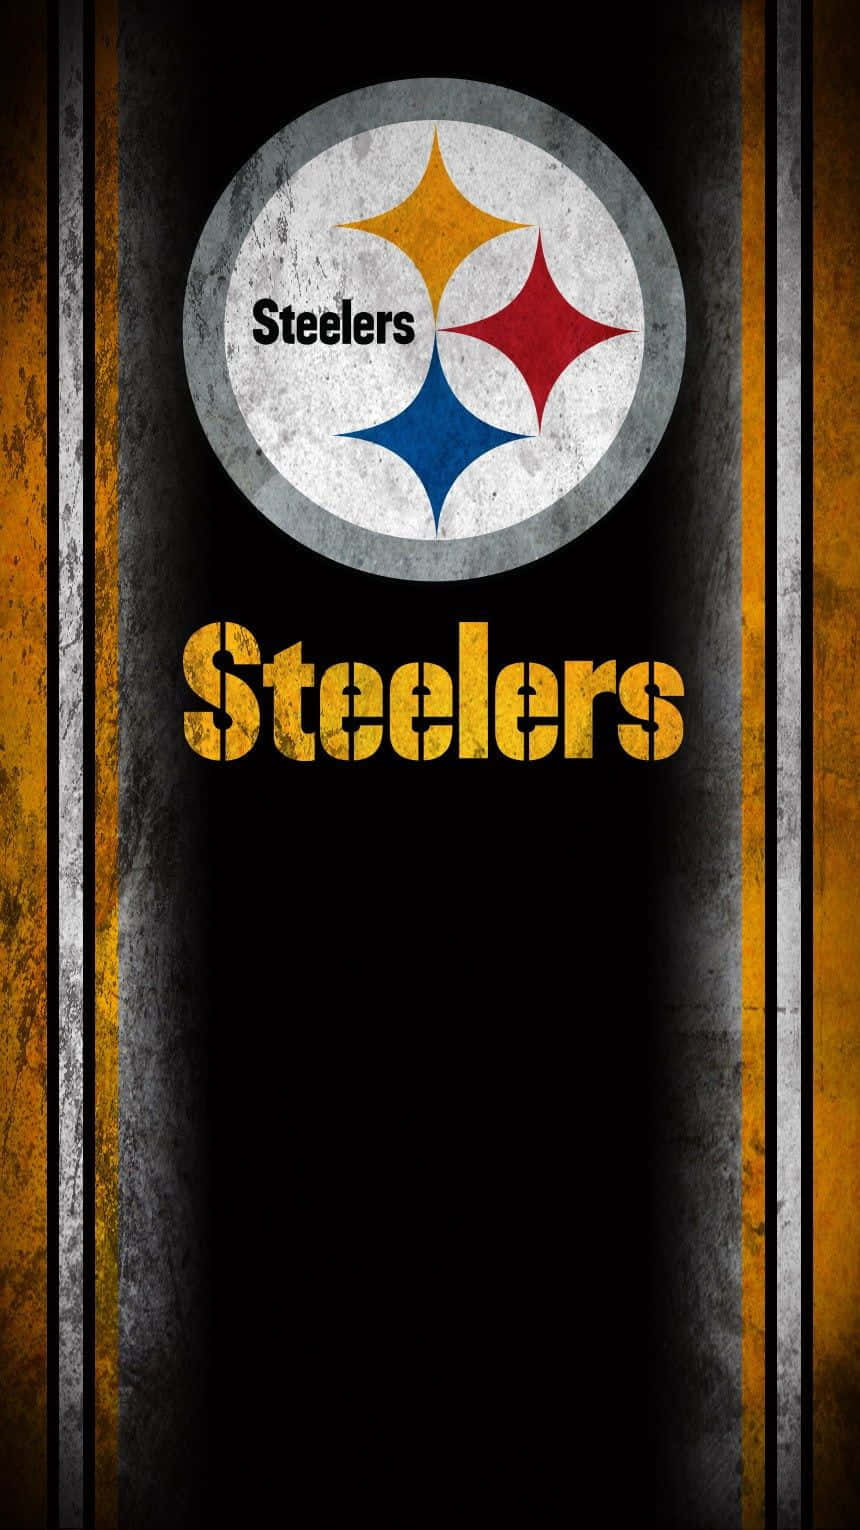 Show Your Steelers Pride On Your Phone! Wallpaper